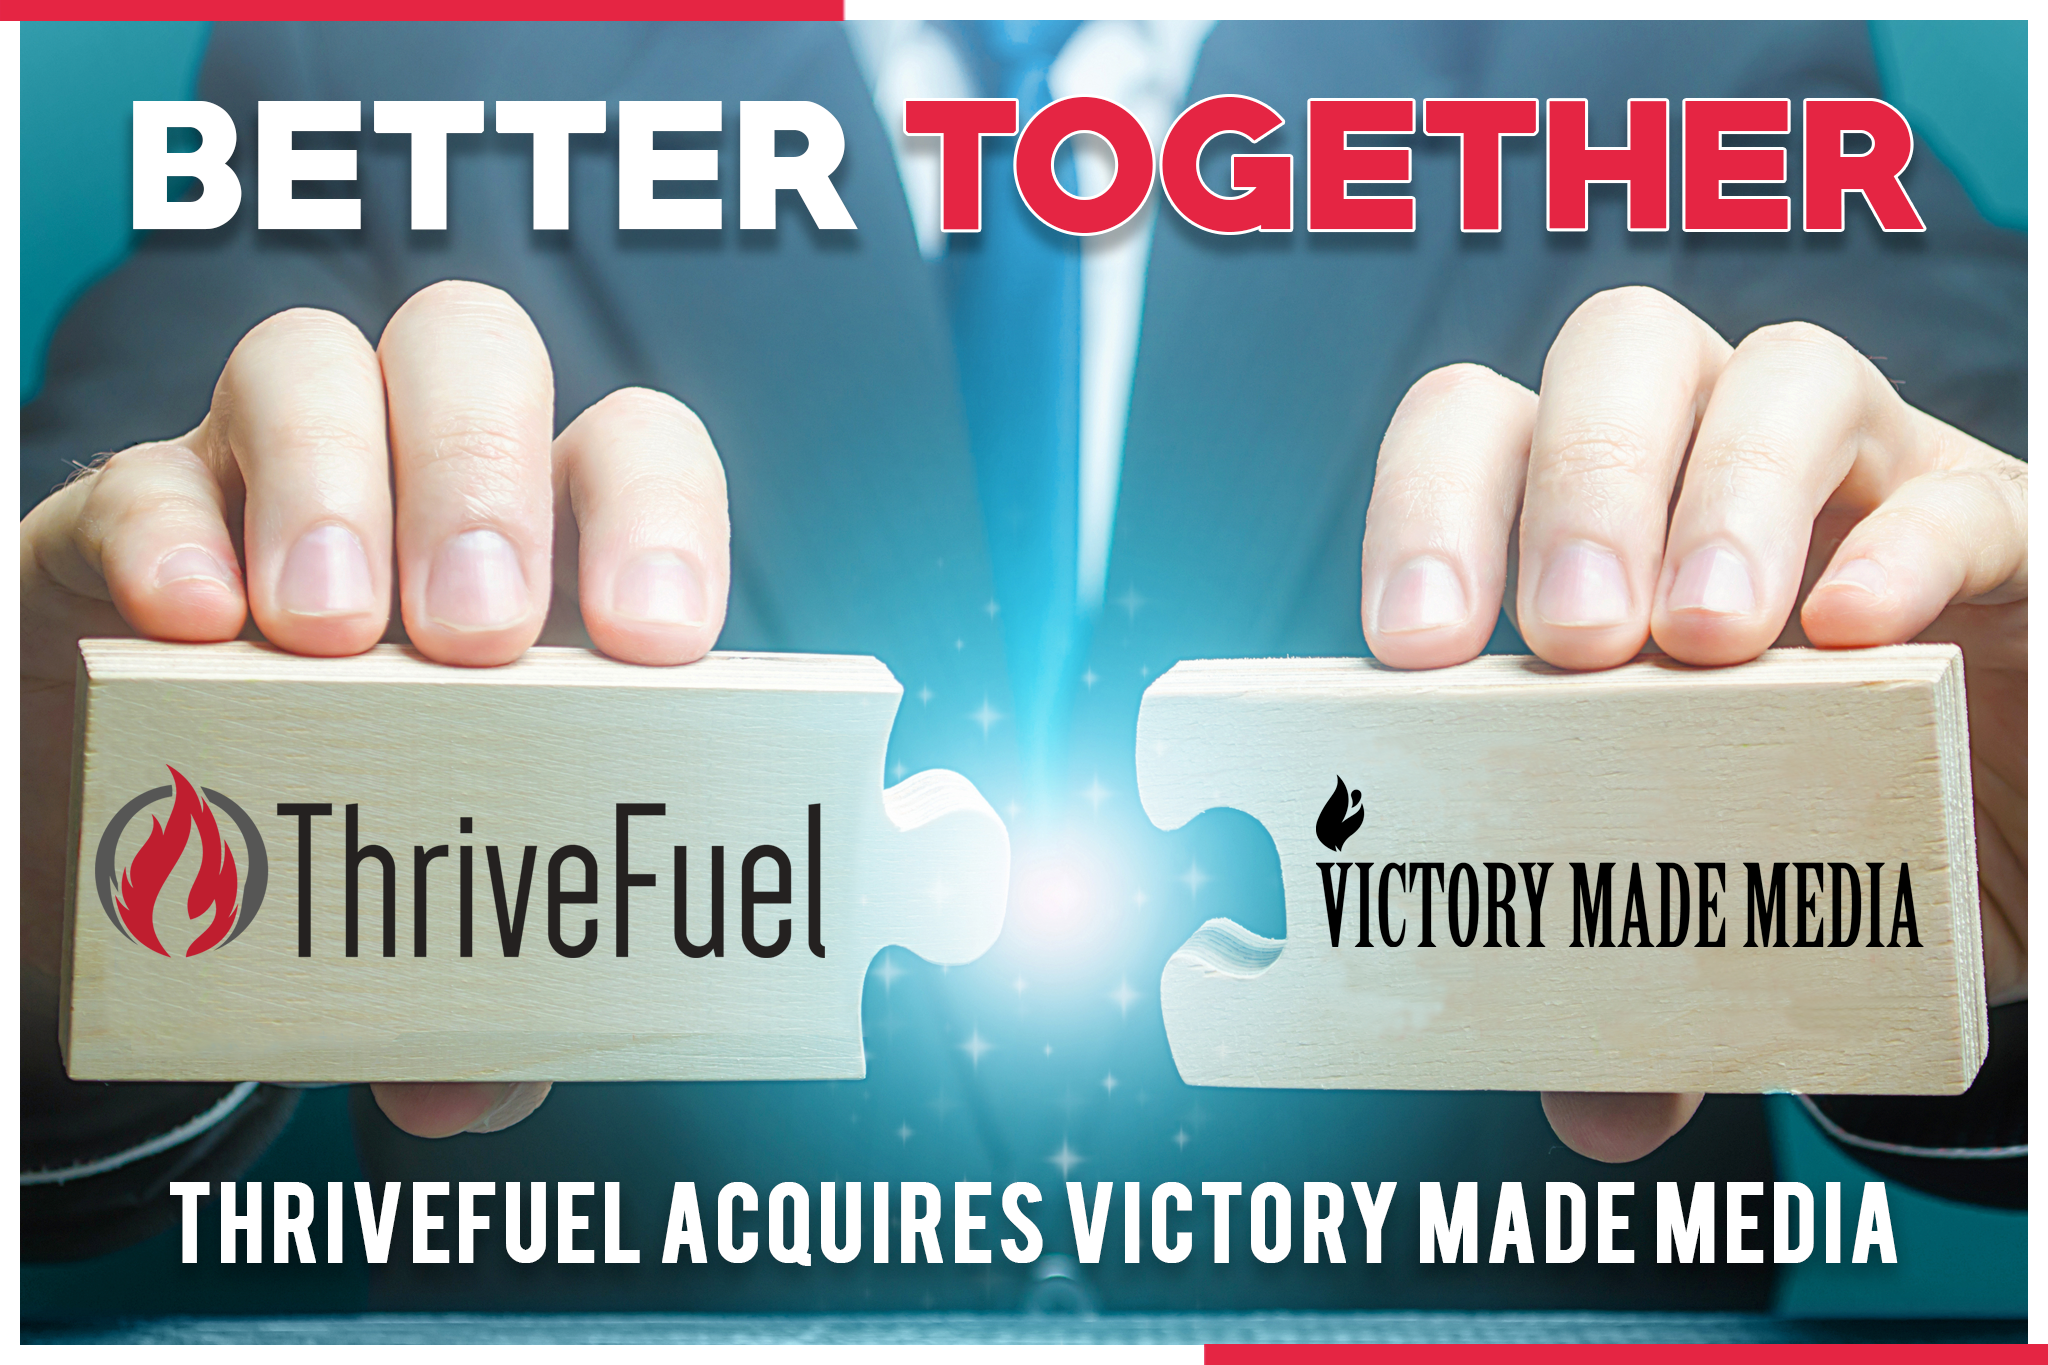 THRIVEFUEL ACQUIRES VICTORY MADE MEDIA